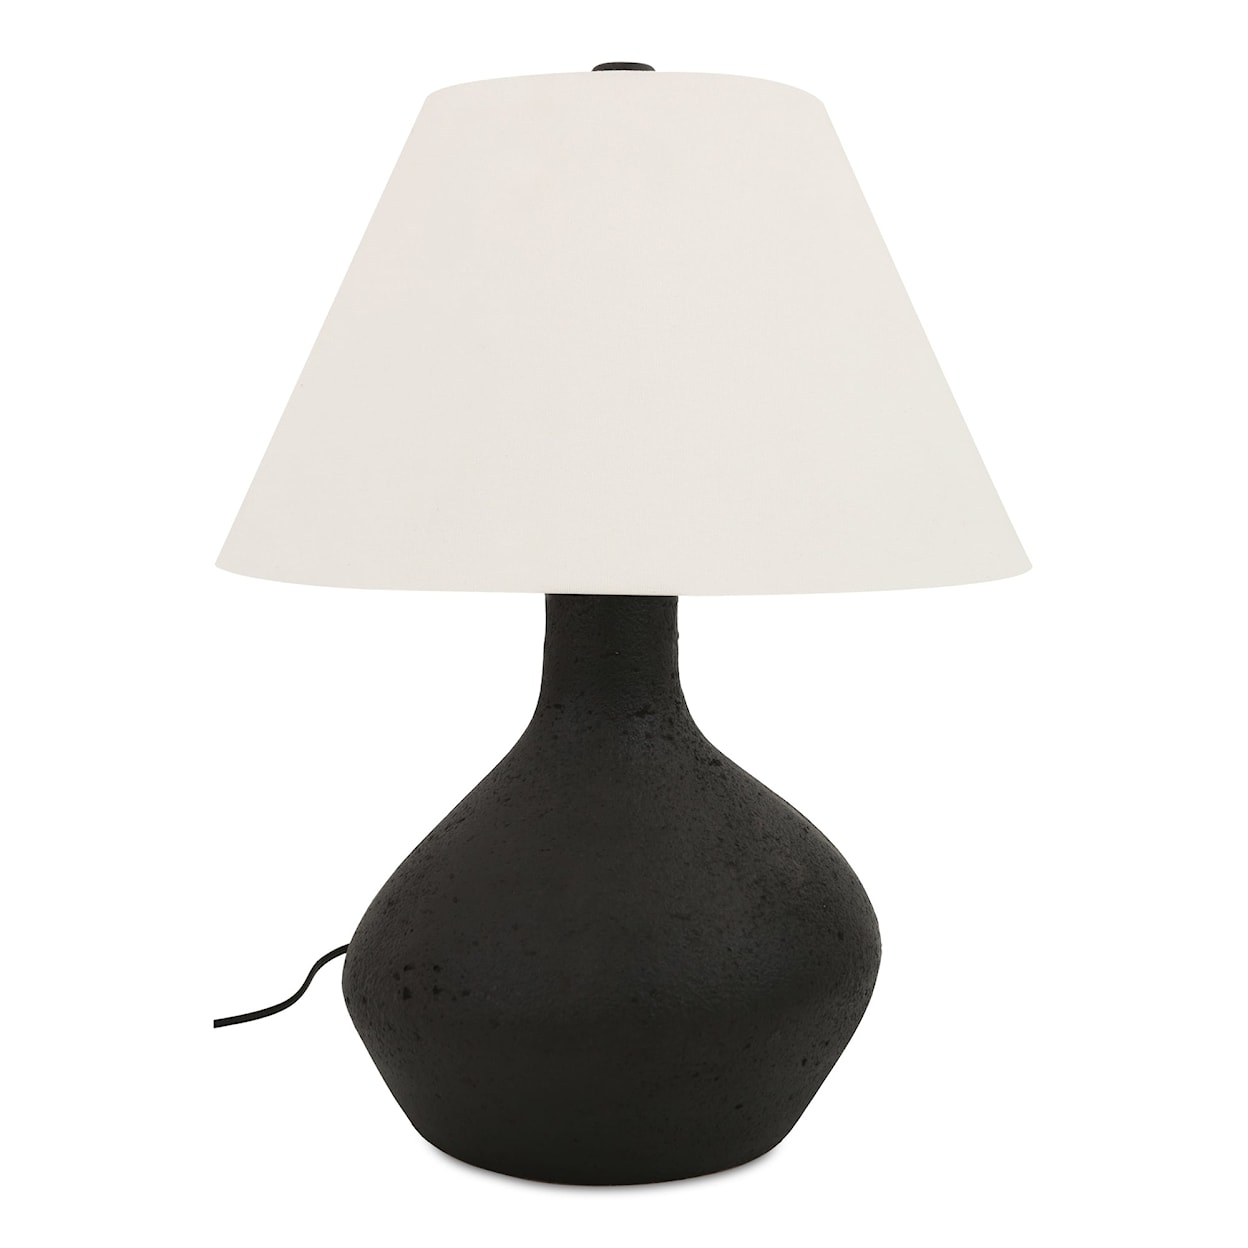 Moe's Home Collection Hanna Table Lamp